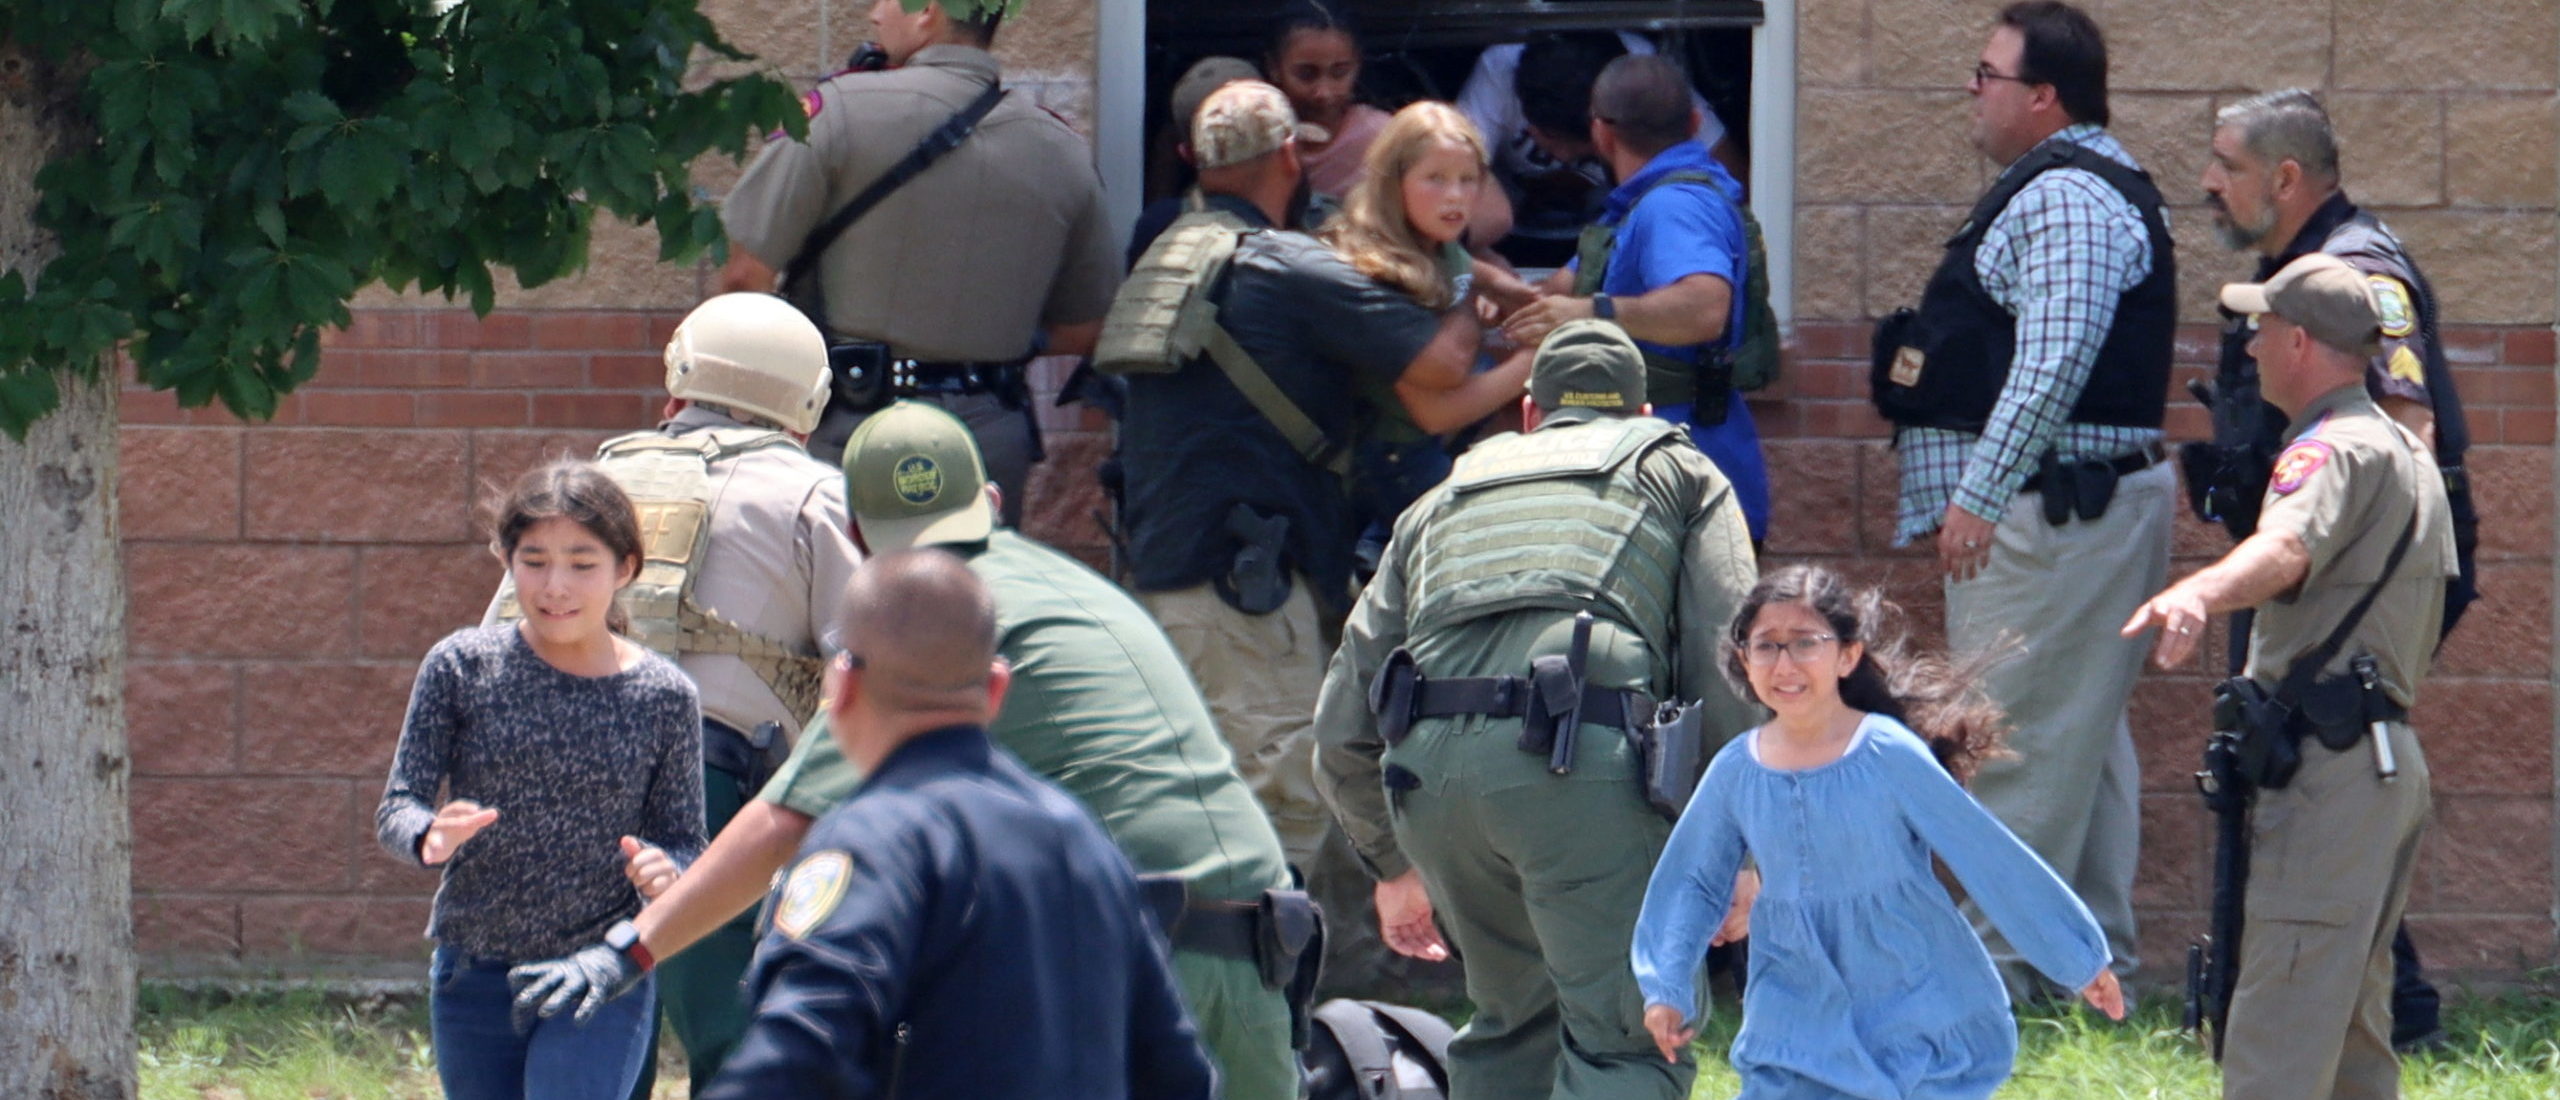 Children run to safety after escaping from a window during a mass shooting at Robb Elementary School where a gunman killed nineteen children and two adults in Uvalde, Texas, U.S. May 24, 2022.